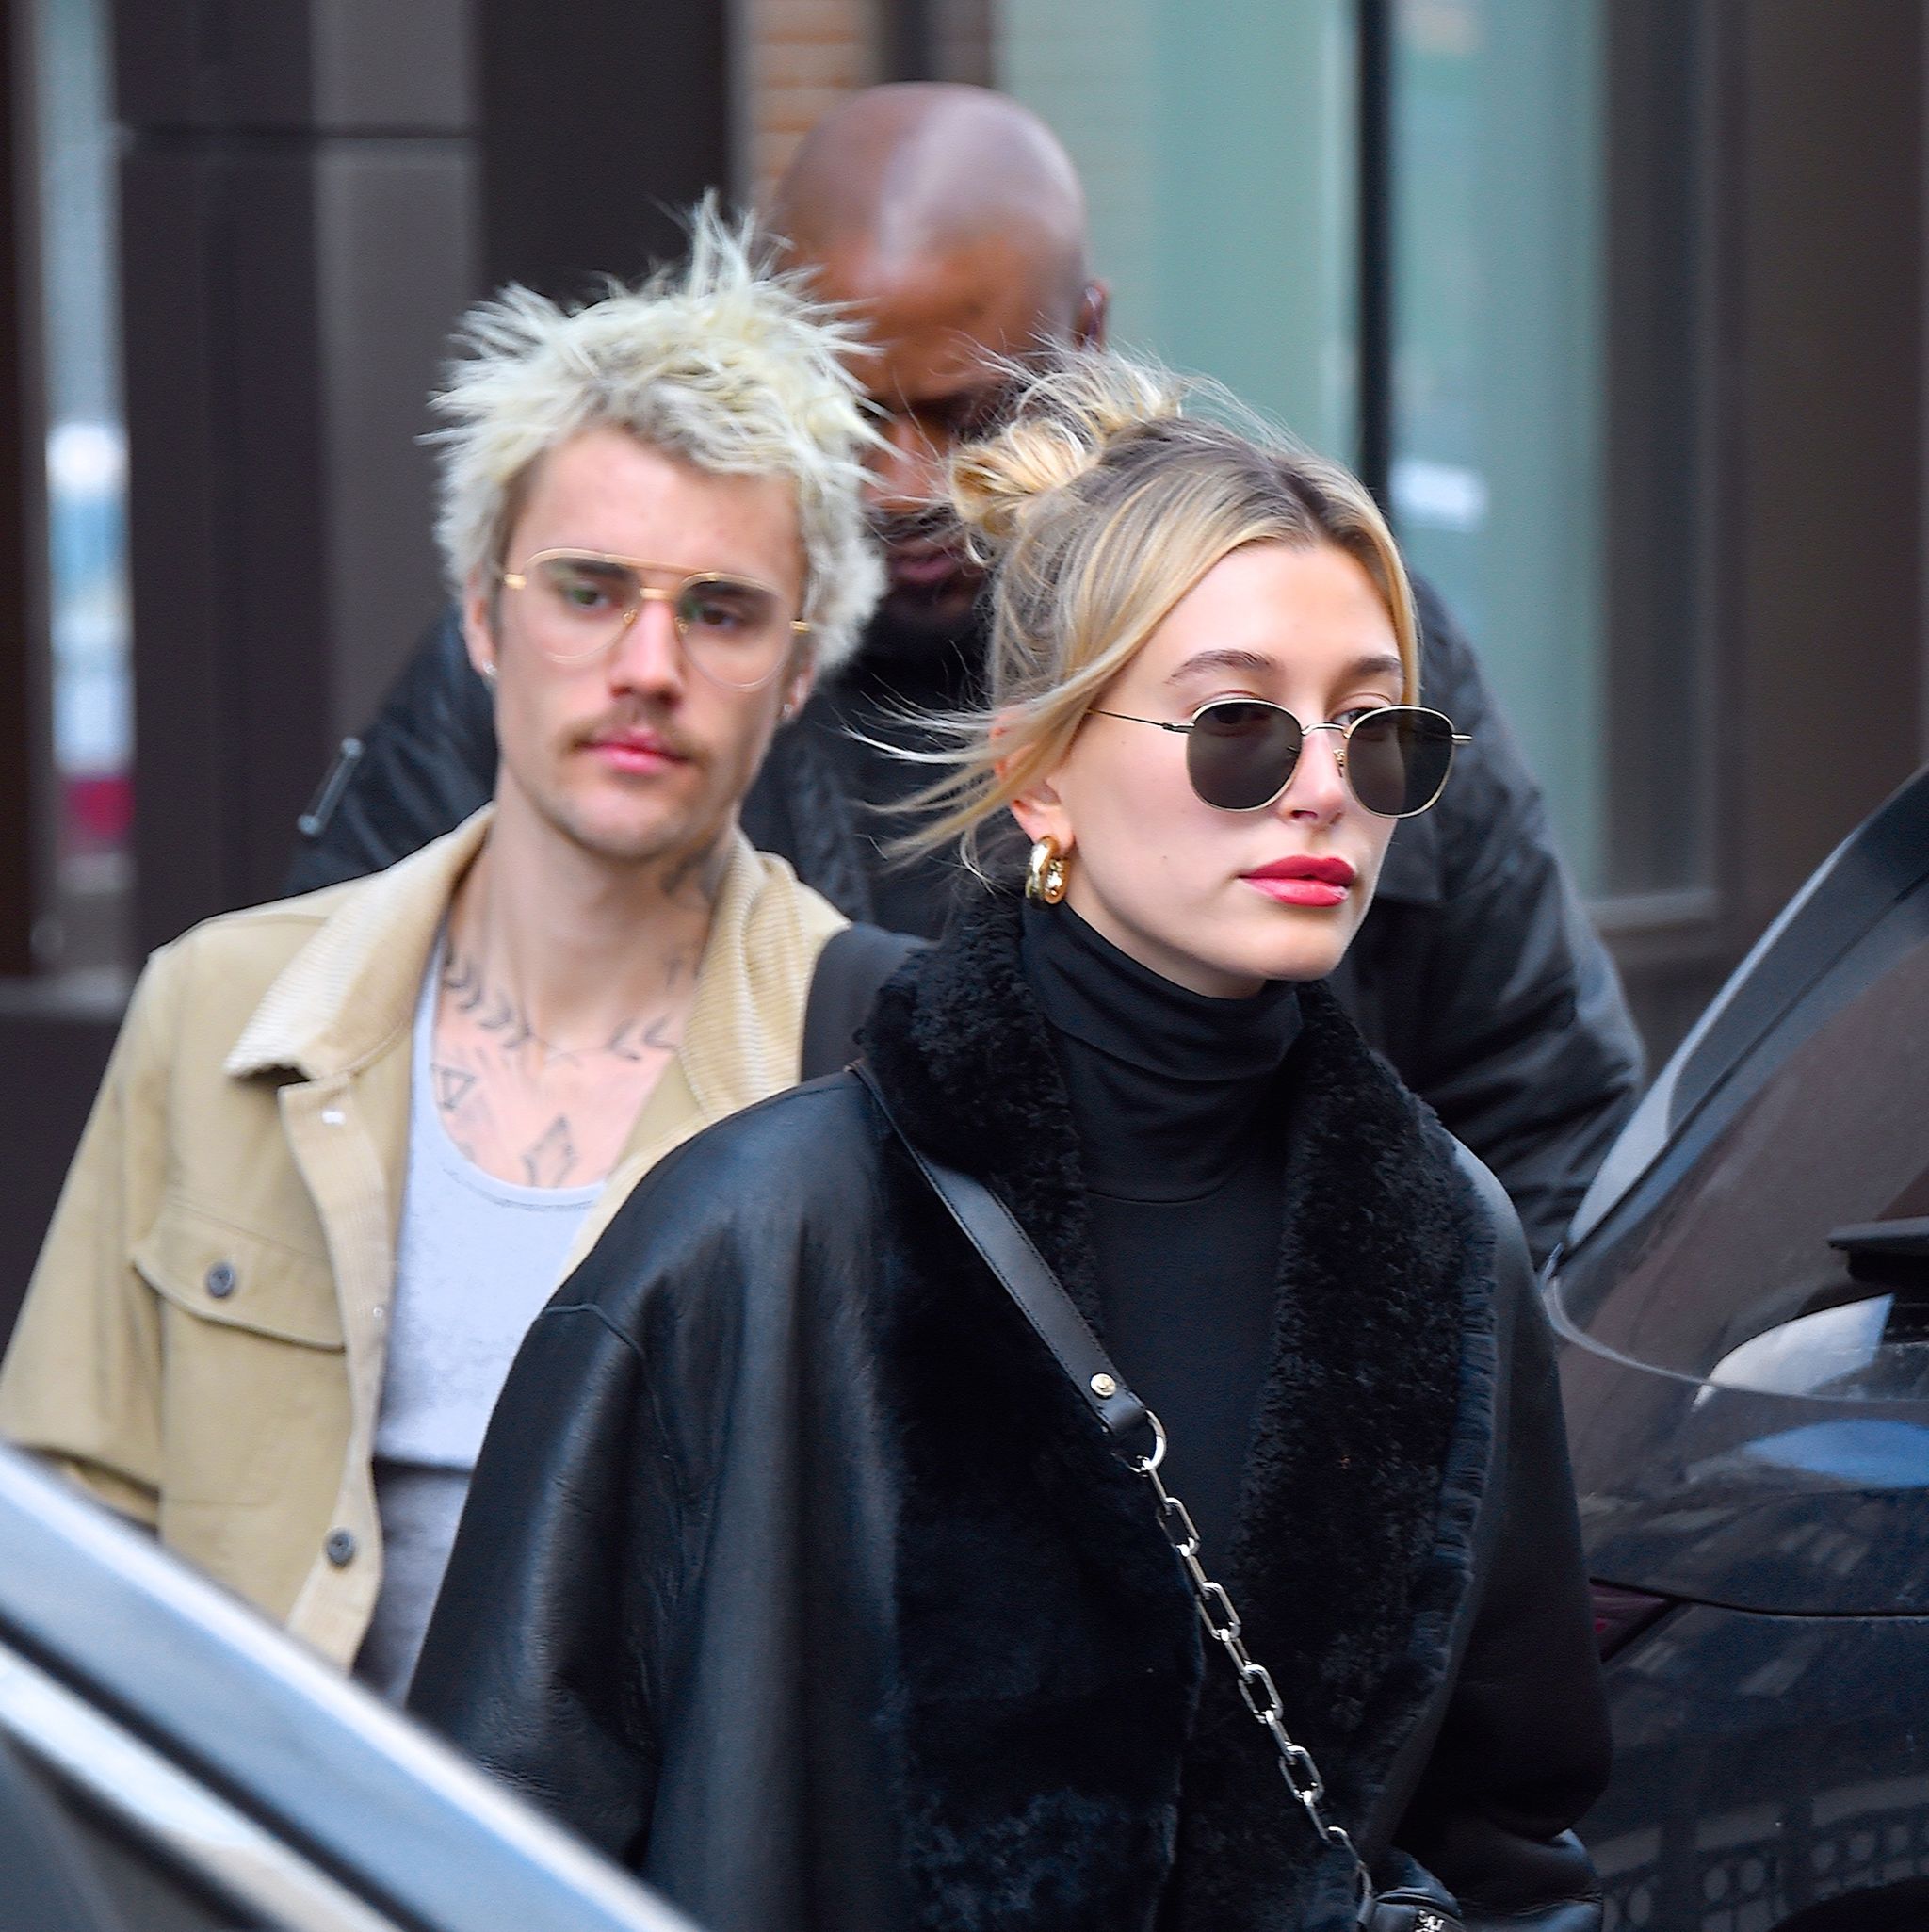 Justin Bieber Says Hailey Baldwin Is Why He Shaved His Mustache